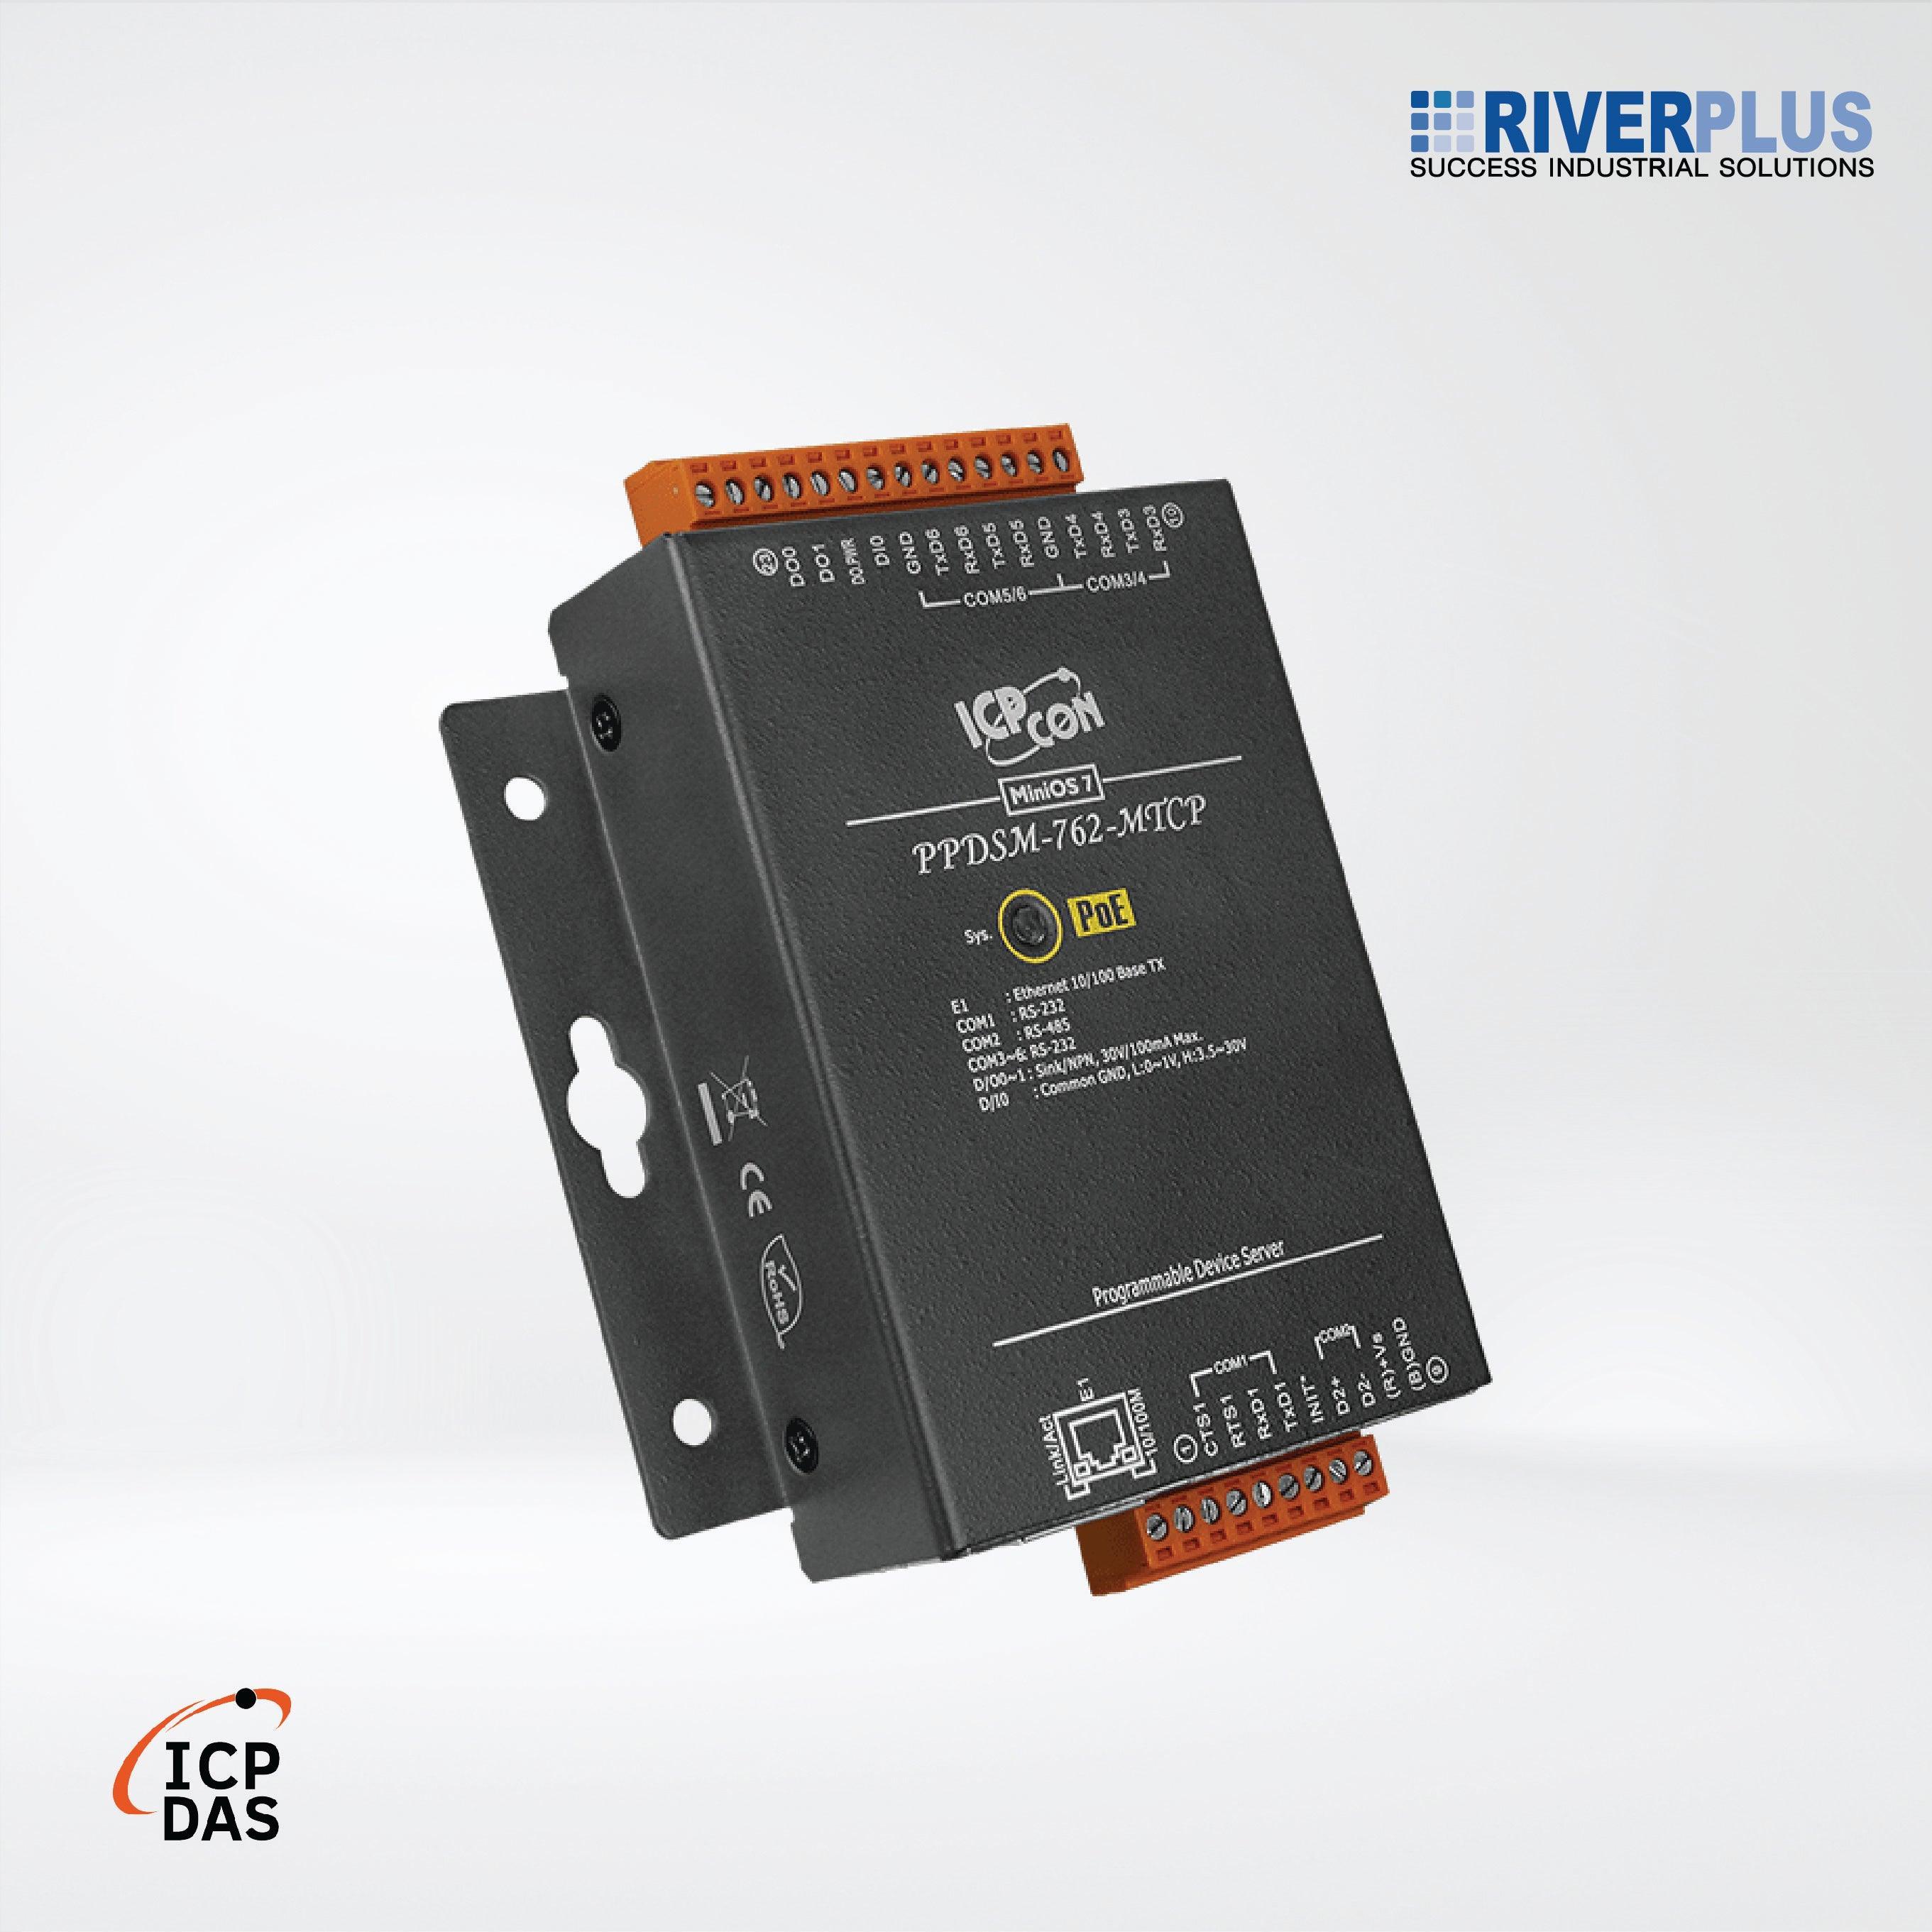 PPDSM-762-MTCP Programmable (5x RS-232 and 1x RS-485) Serial-to-Ethernet Device Server - Riverplus